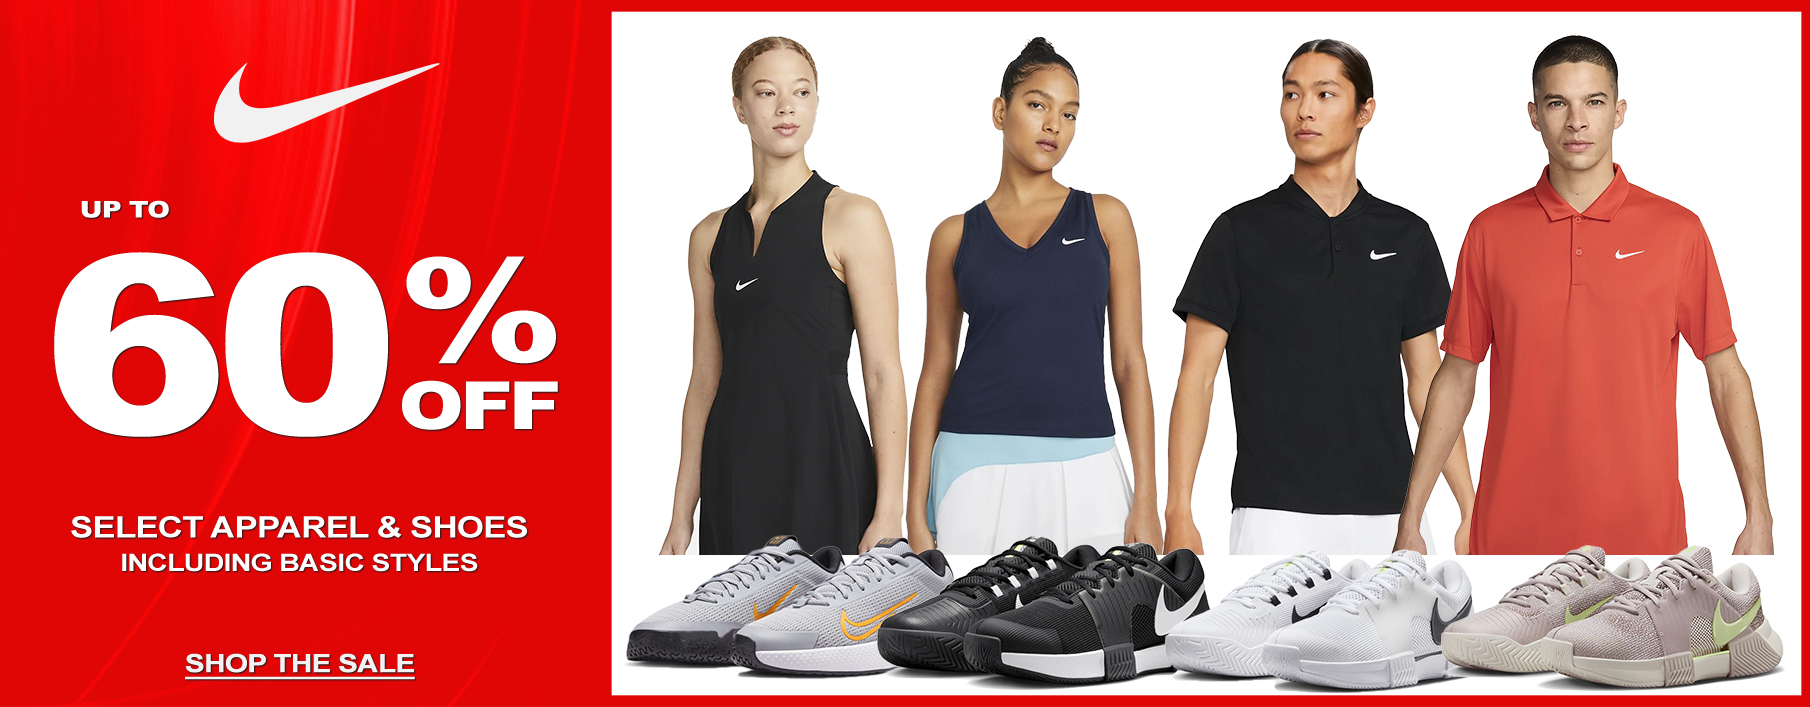 tennis nike sale apparel and shoes